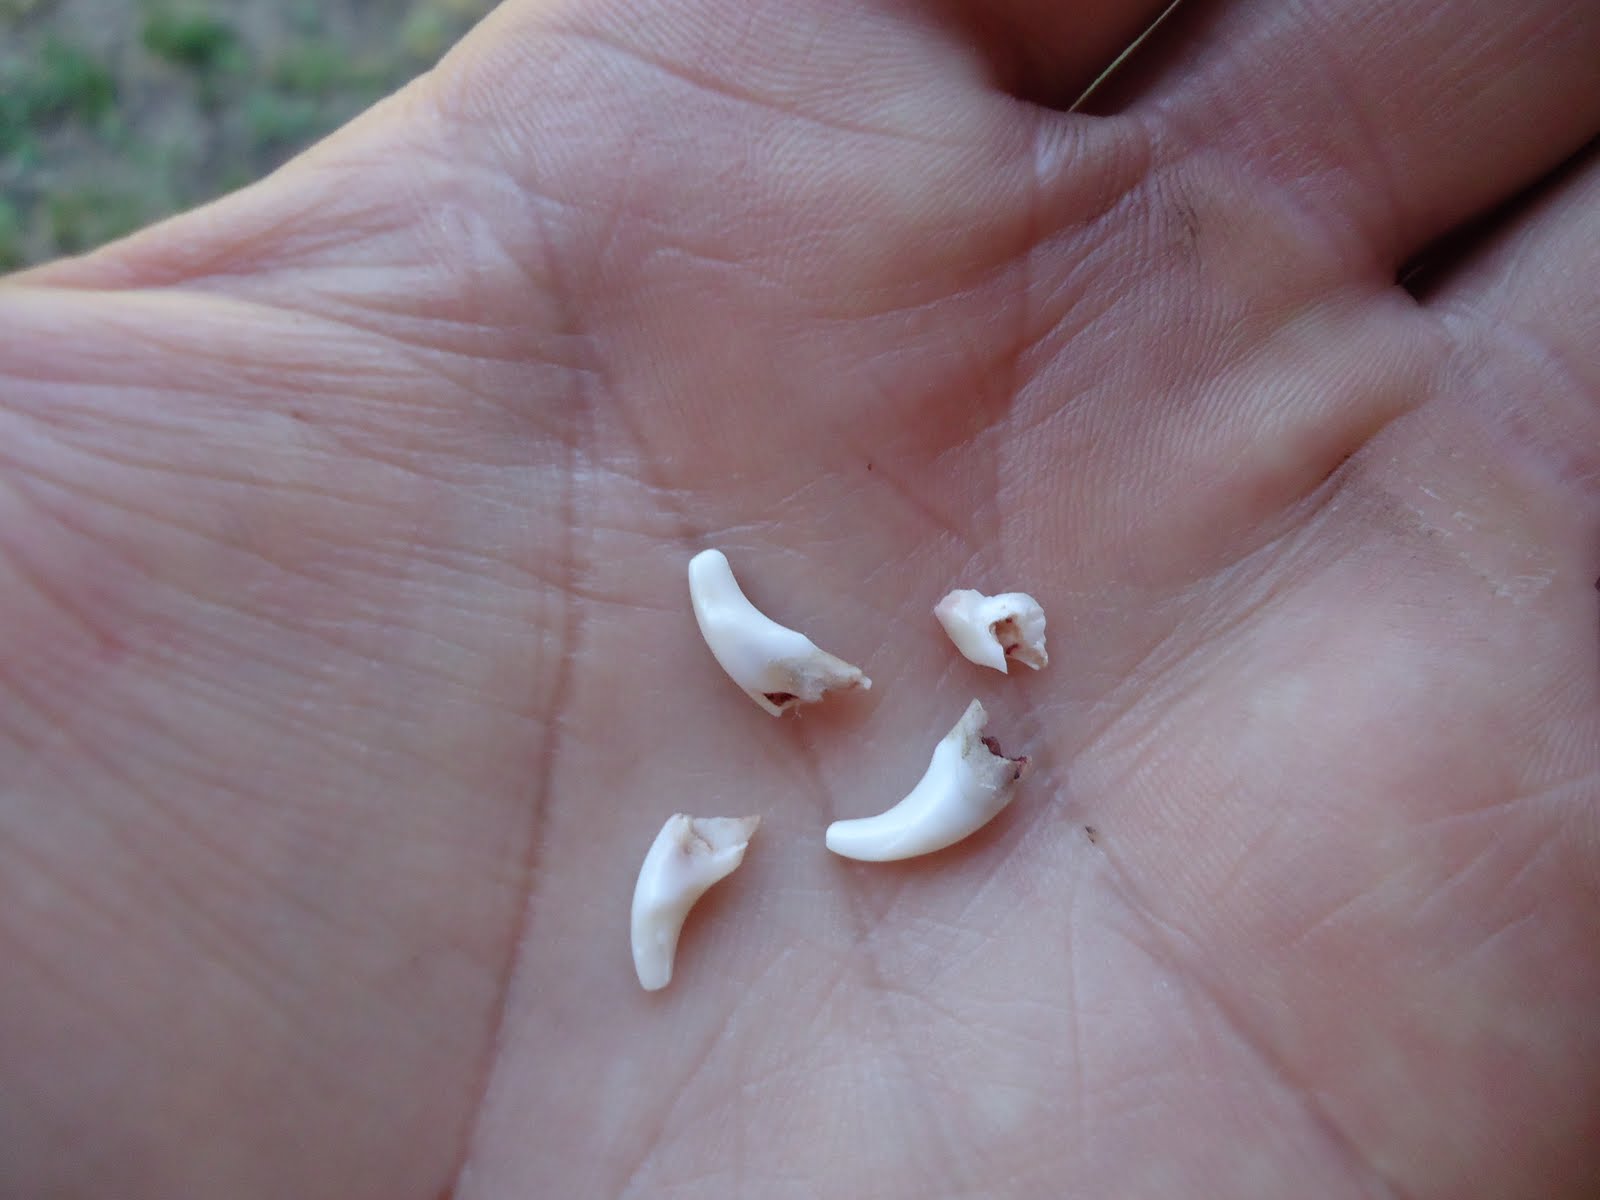 Are these puppy teeth!?!?!